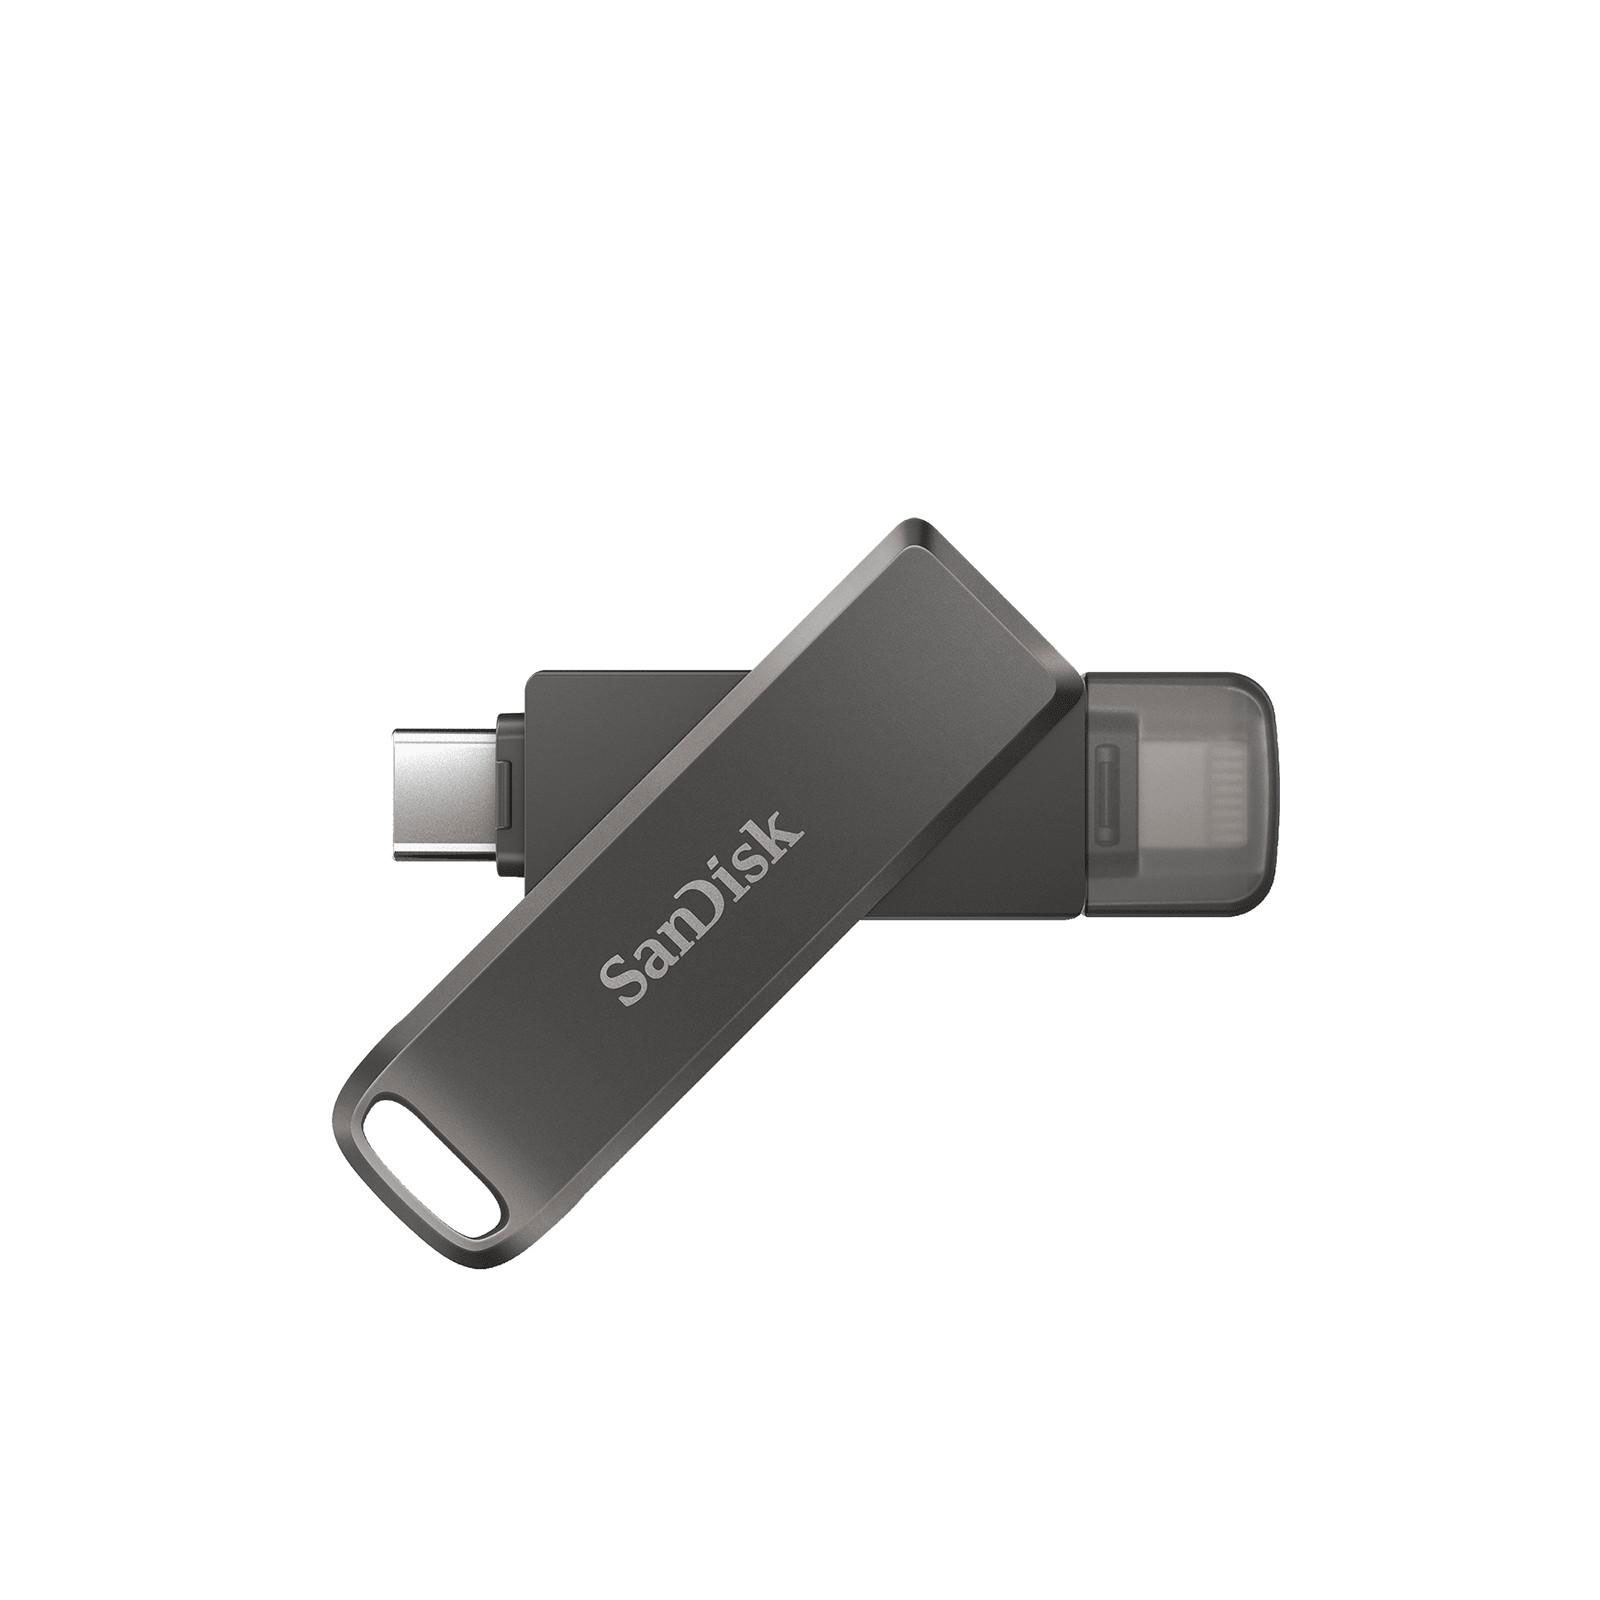 SanDisk iXpand Luxe USB-Stick